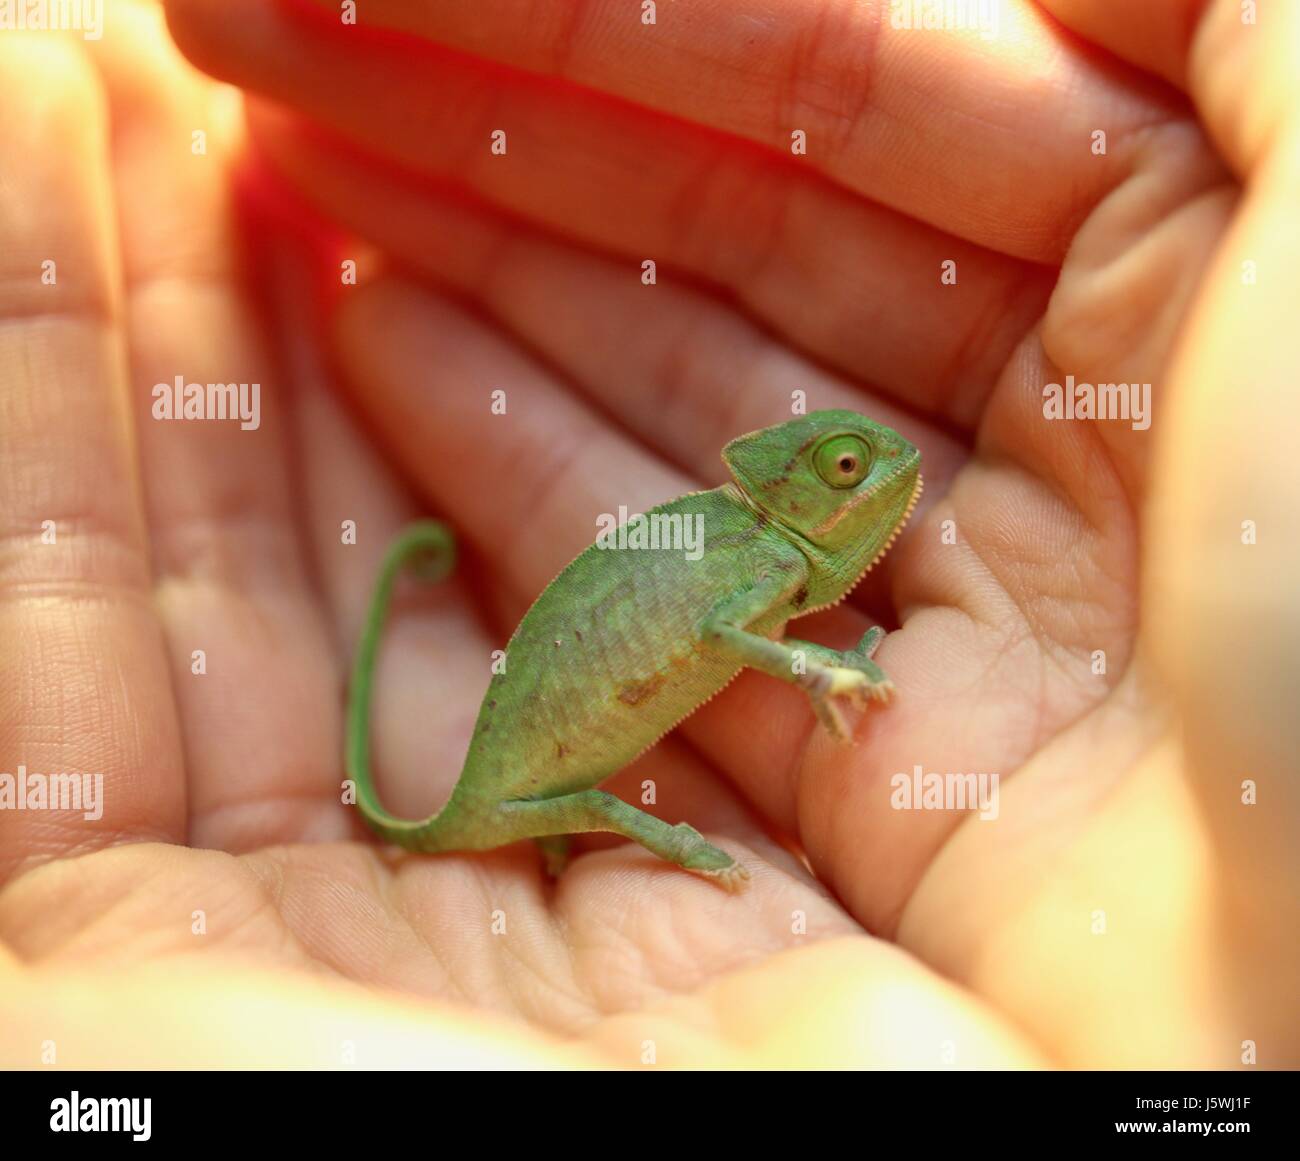 Baby chameleon in your hands Stock Photo